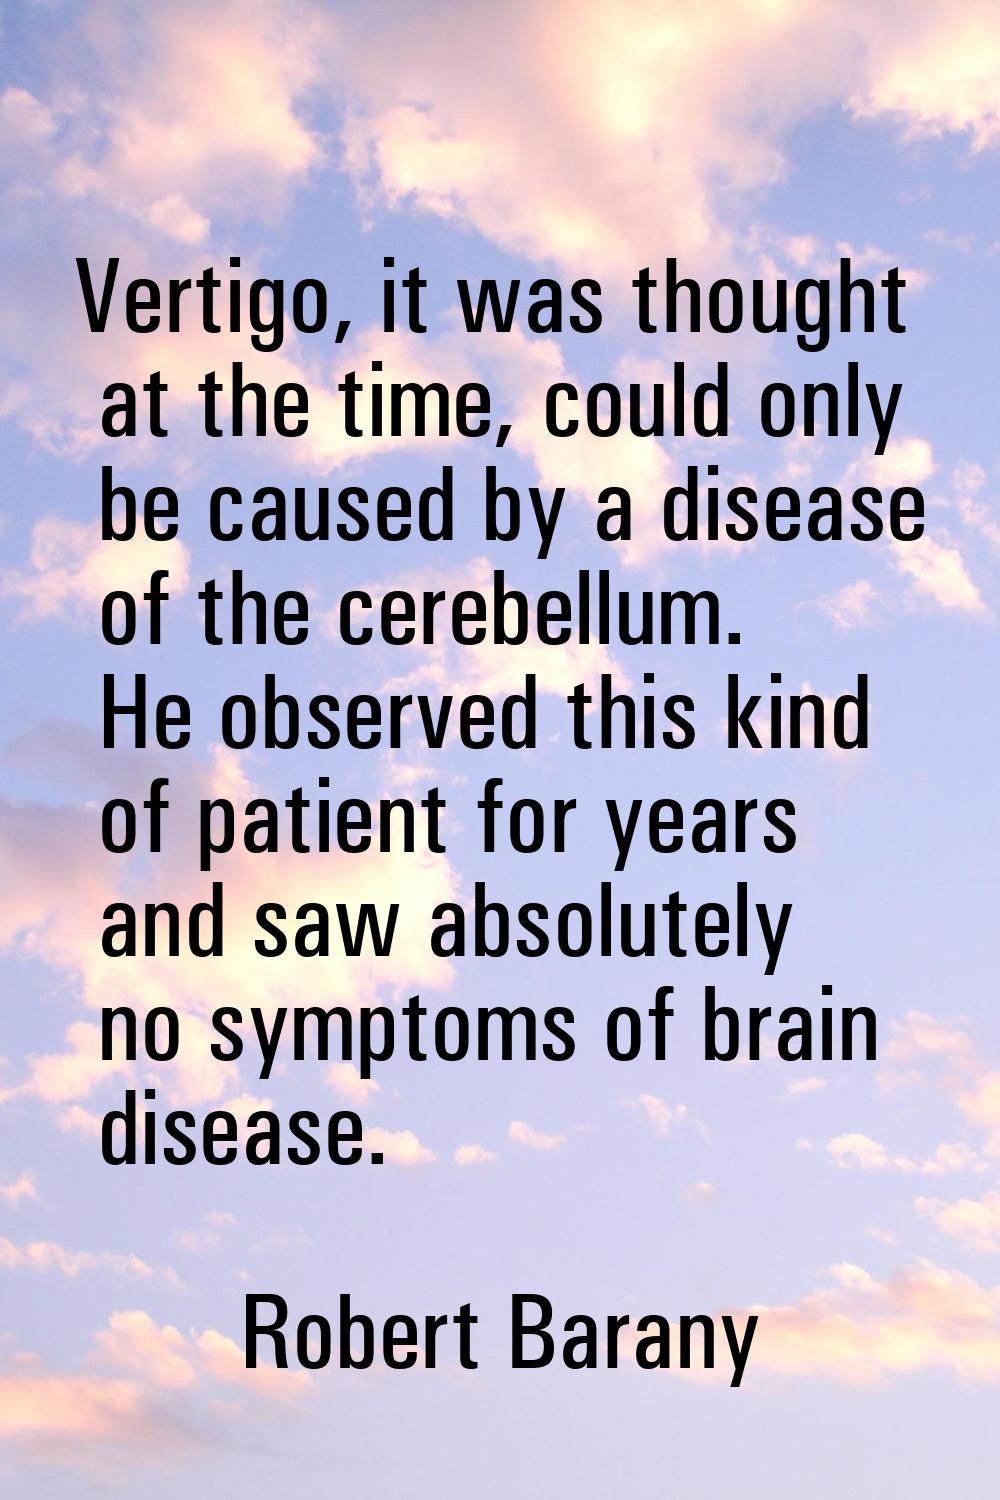 Vertigo, it was thought at the time, could only be caused by a disease of the cerebellum. He observ